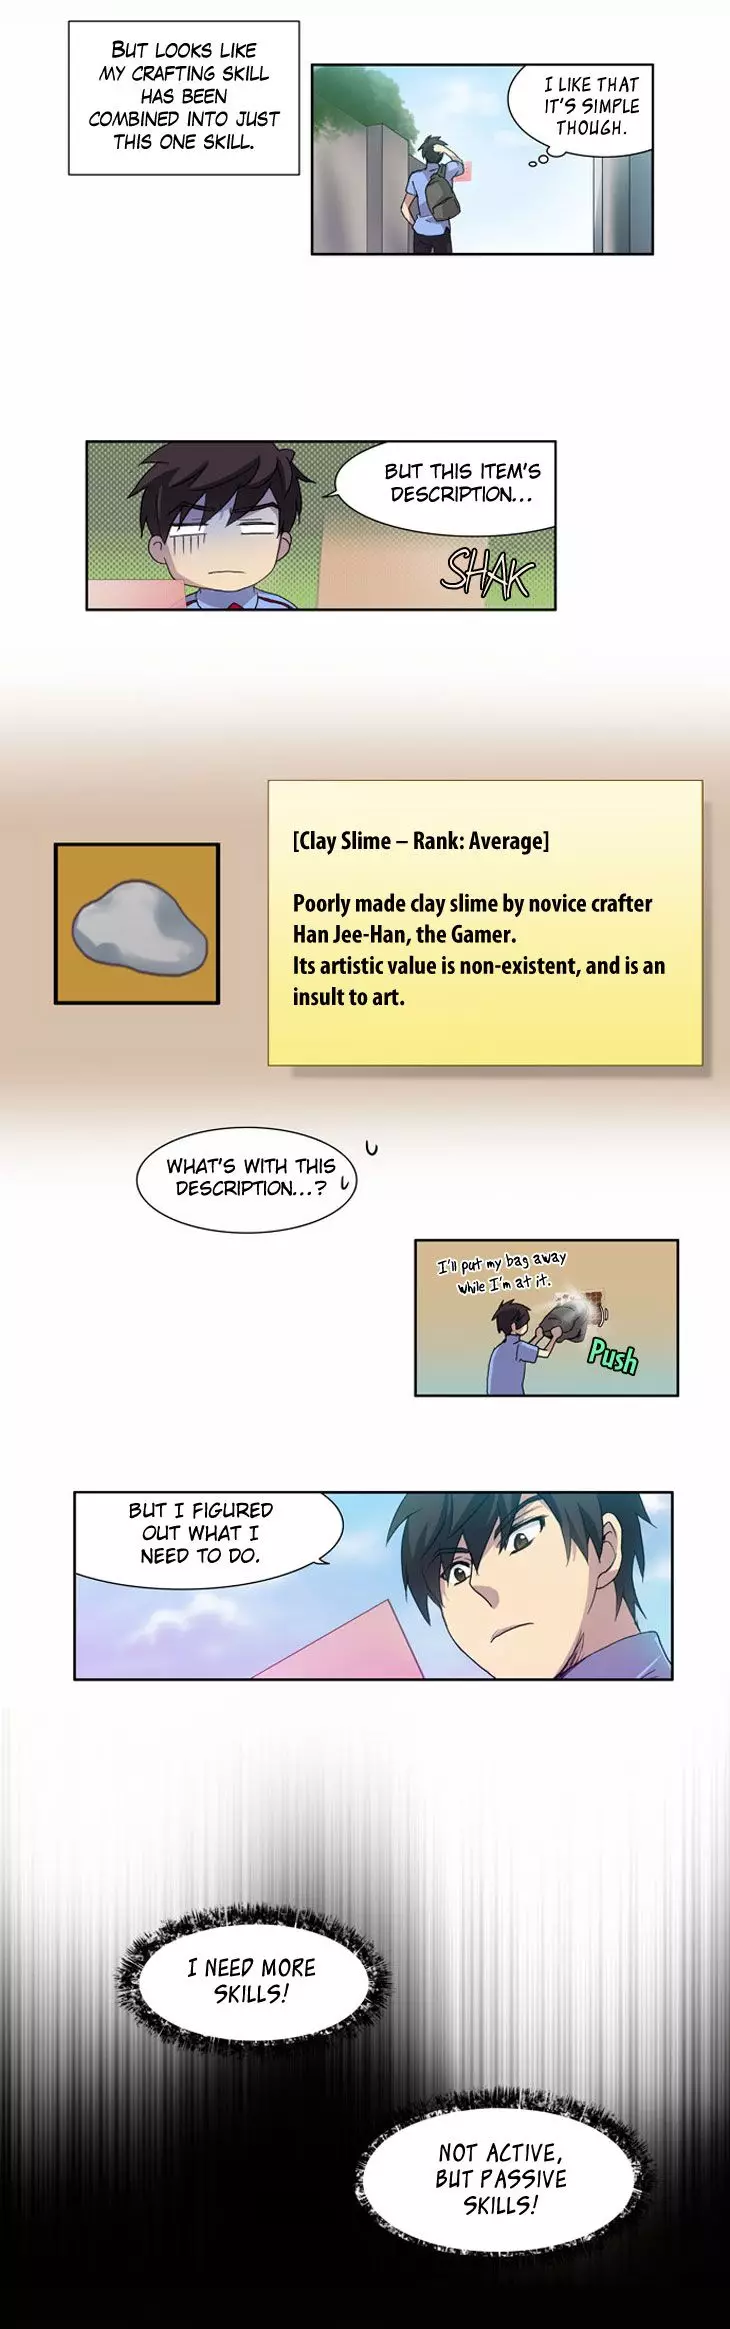 The Gamer - 15 page p_00015